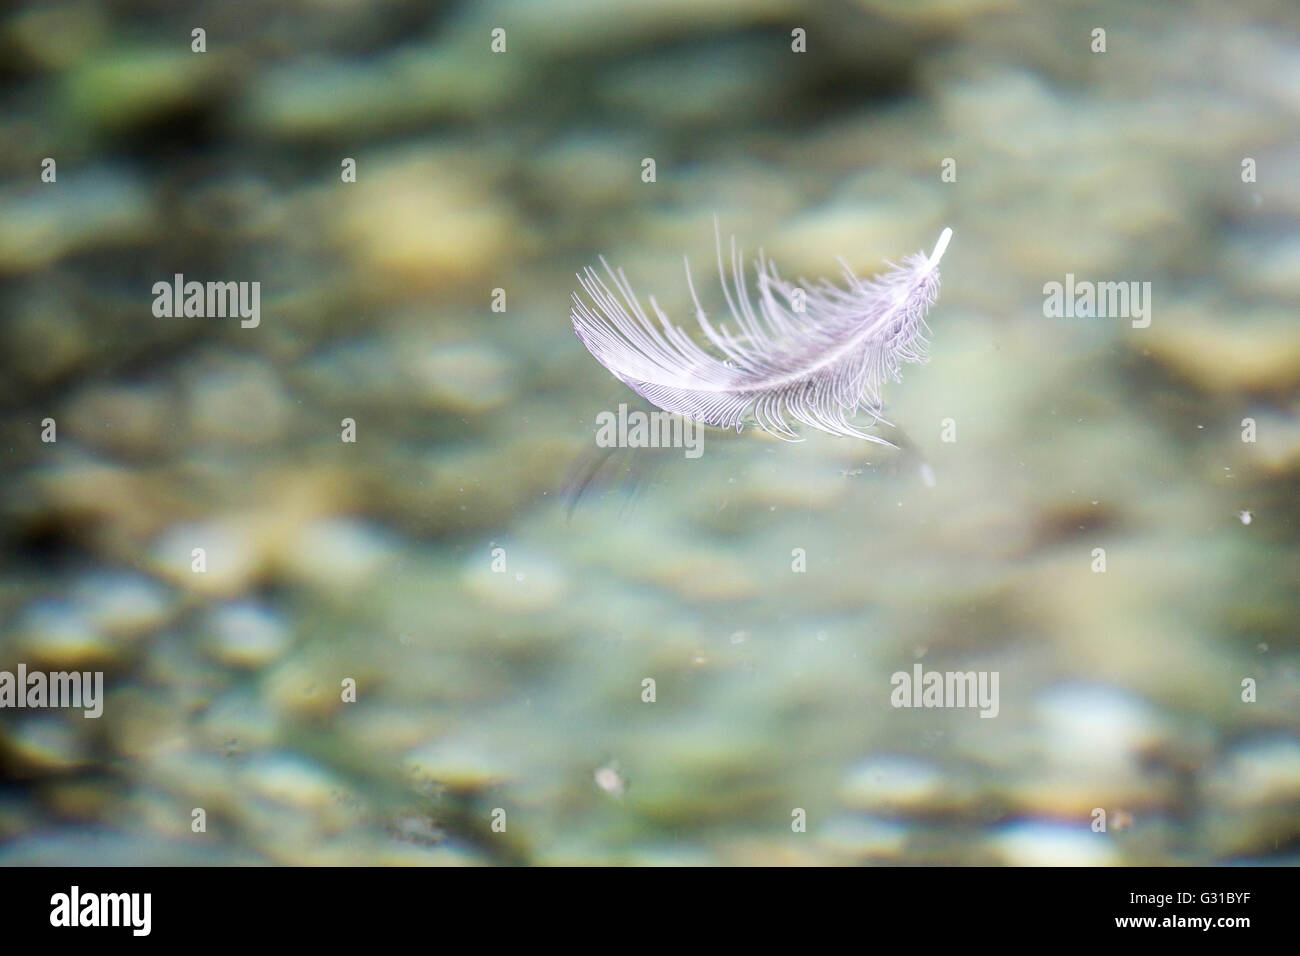 Weightless white feather floating on the water surface Stock Photo